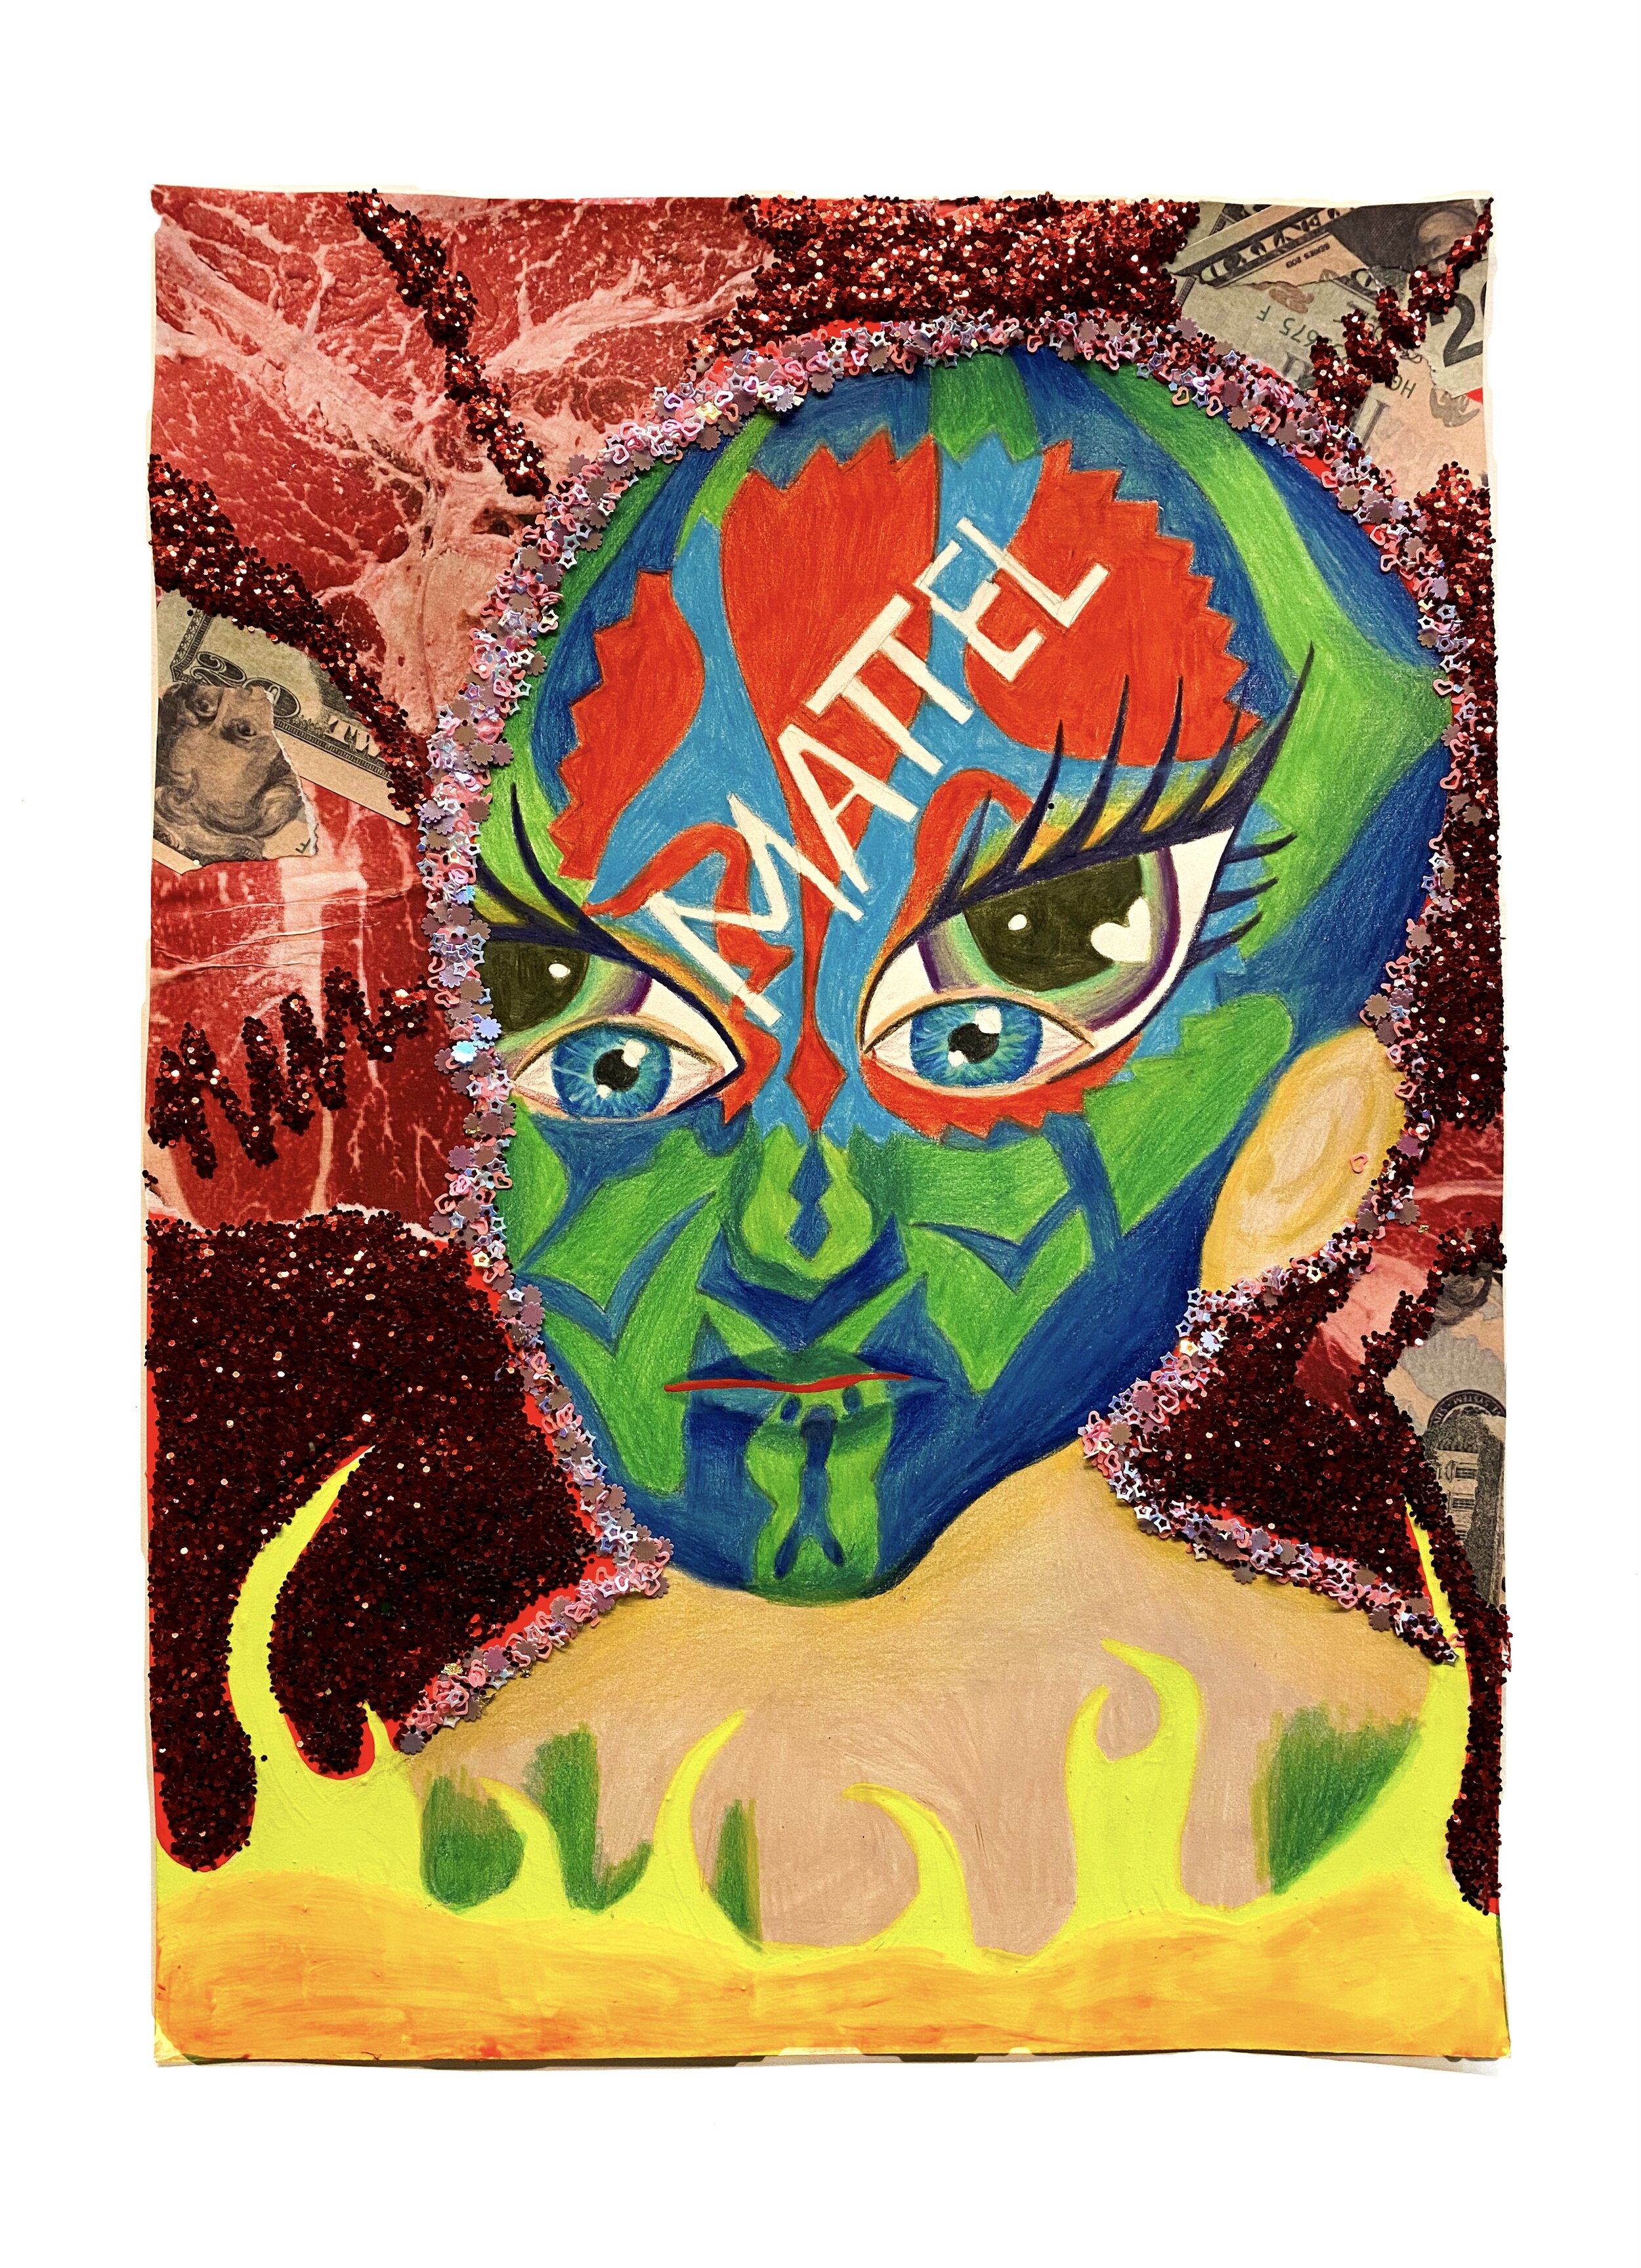   Baby with Darth Maul and Mattel Logo Face Paint,  2021  14 x 10 inches (38.1 x 25.4 cm.)  Colored pencil, money, acrylic paint, glitter, Elmer's glue, Modge Podge, and pictures of meat on paper 